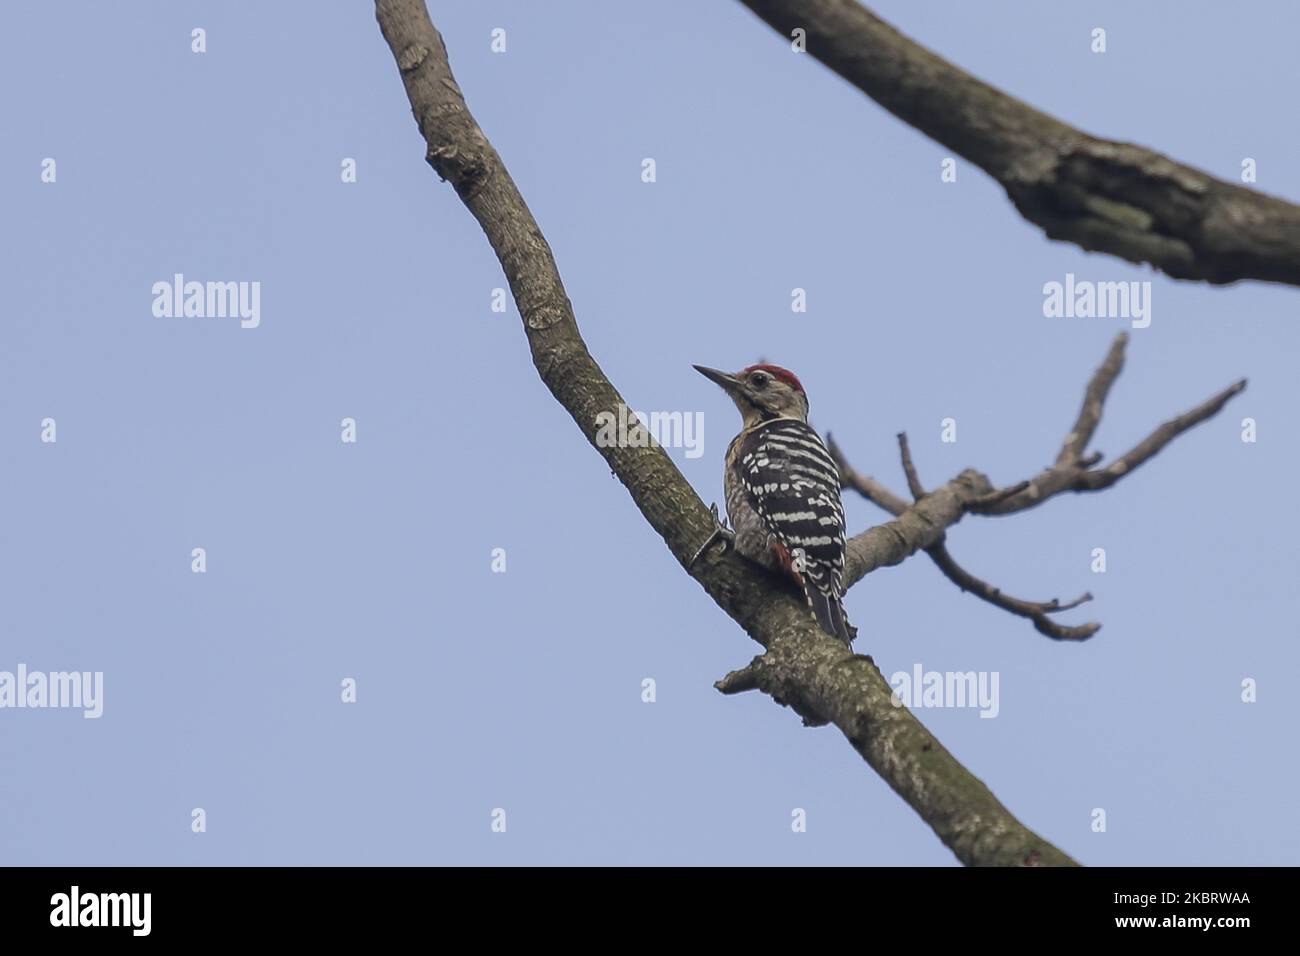 Fulvous-breasted woodpecker is seen on a tree at the village on the outskirts of Kathmandu, Nepal on June 29, 2020. Fulvous-breasted woodpecker is a species of bird in the family Picidae. It is found in Nepal, India, Bangladesh, Bhutan, and Myanmar. (Photo by Sunil Pradhan/NurPhoto) Stock Photo